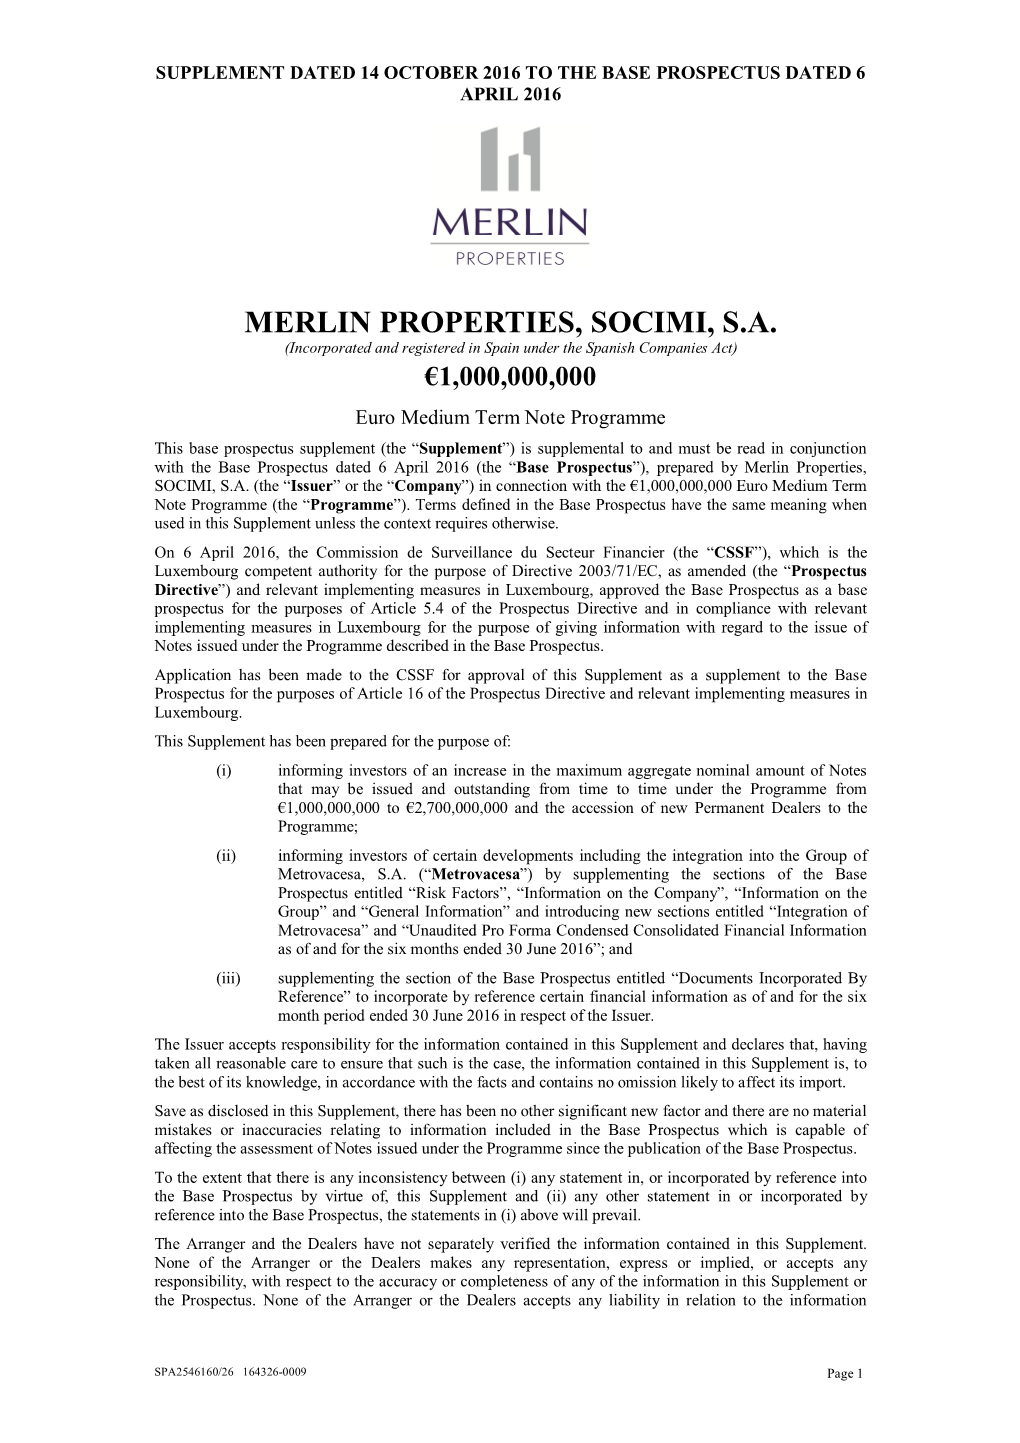 MERLIN PROPERTIES, SOCIMI, S.A. (Incorporated and Registered in Spain Under the Spanish Companies Act) €1,000,000,000